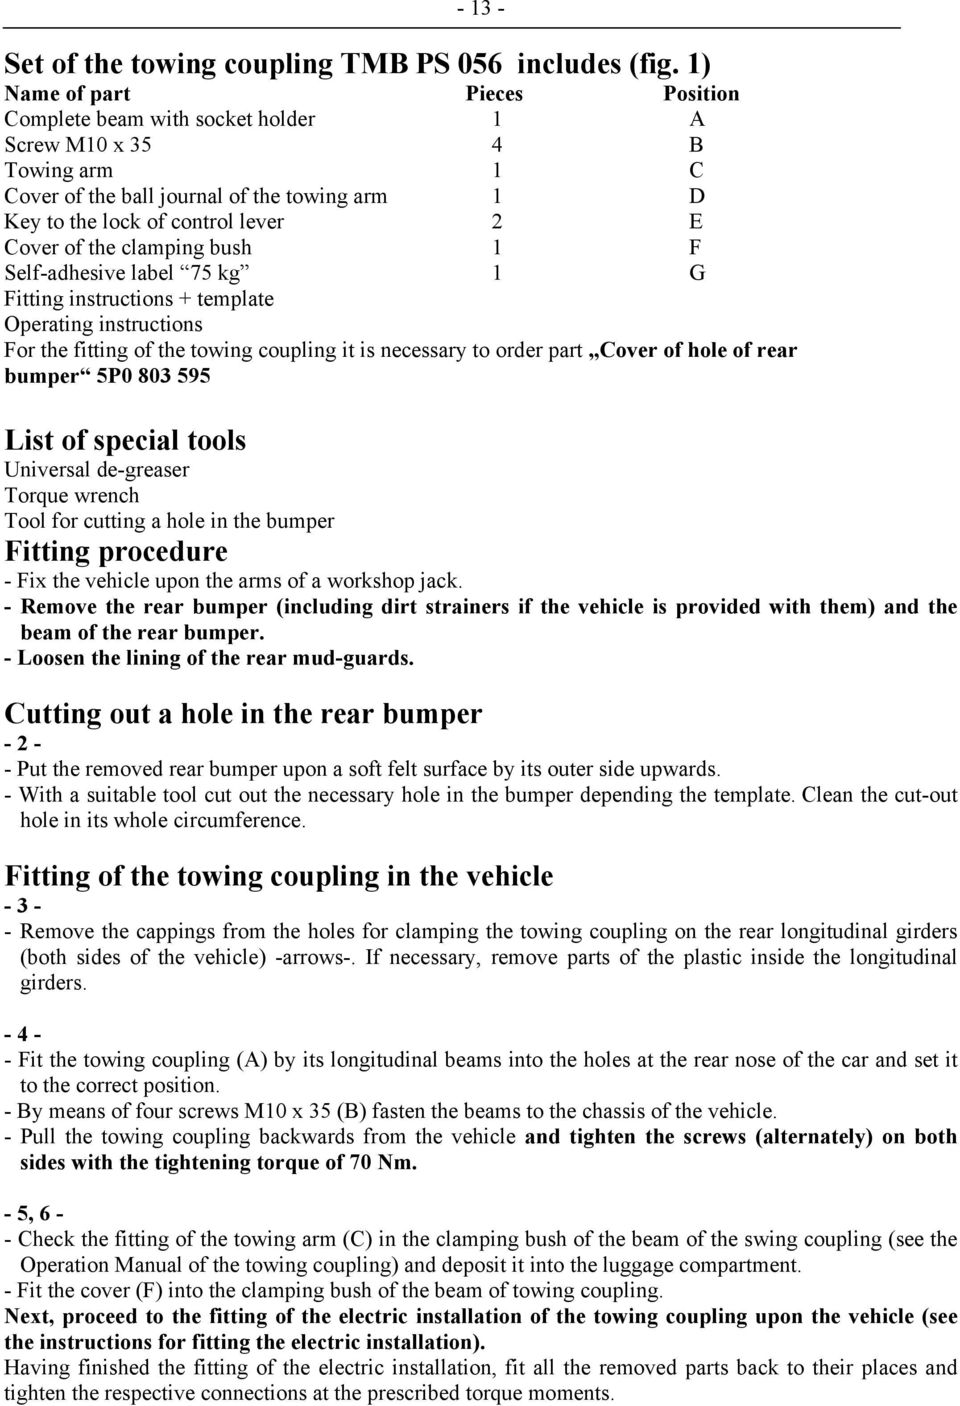 the clamping bush 1 F Self-adhesive label 75 kg 1 G Fitting instructions + template Operating instructions For the fitting of the towing coupling it is necessary to order part Cover of hole of rear